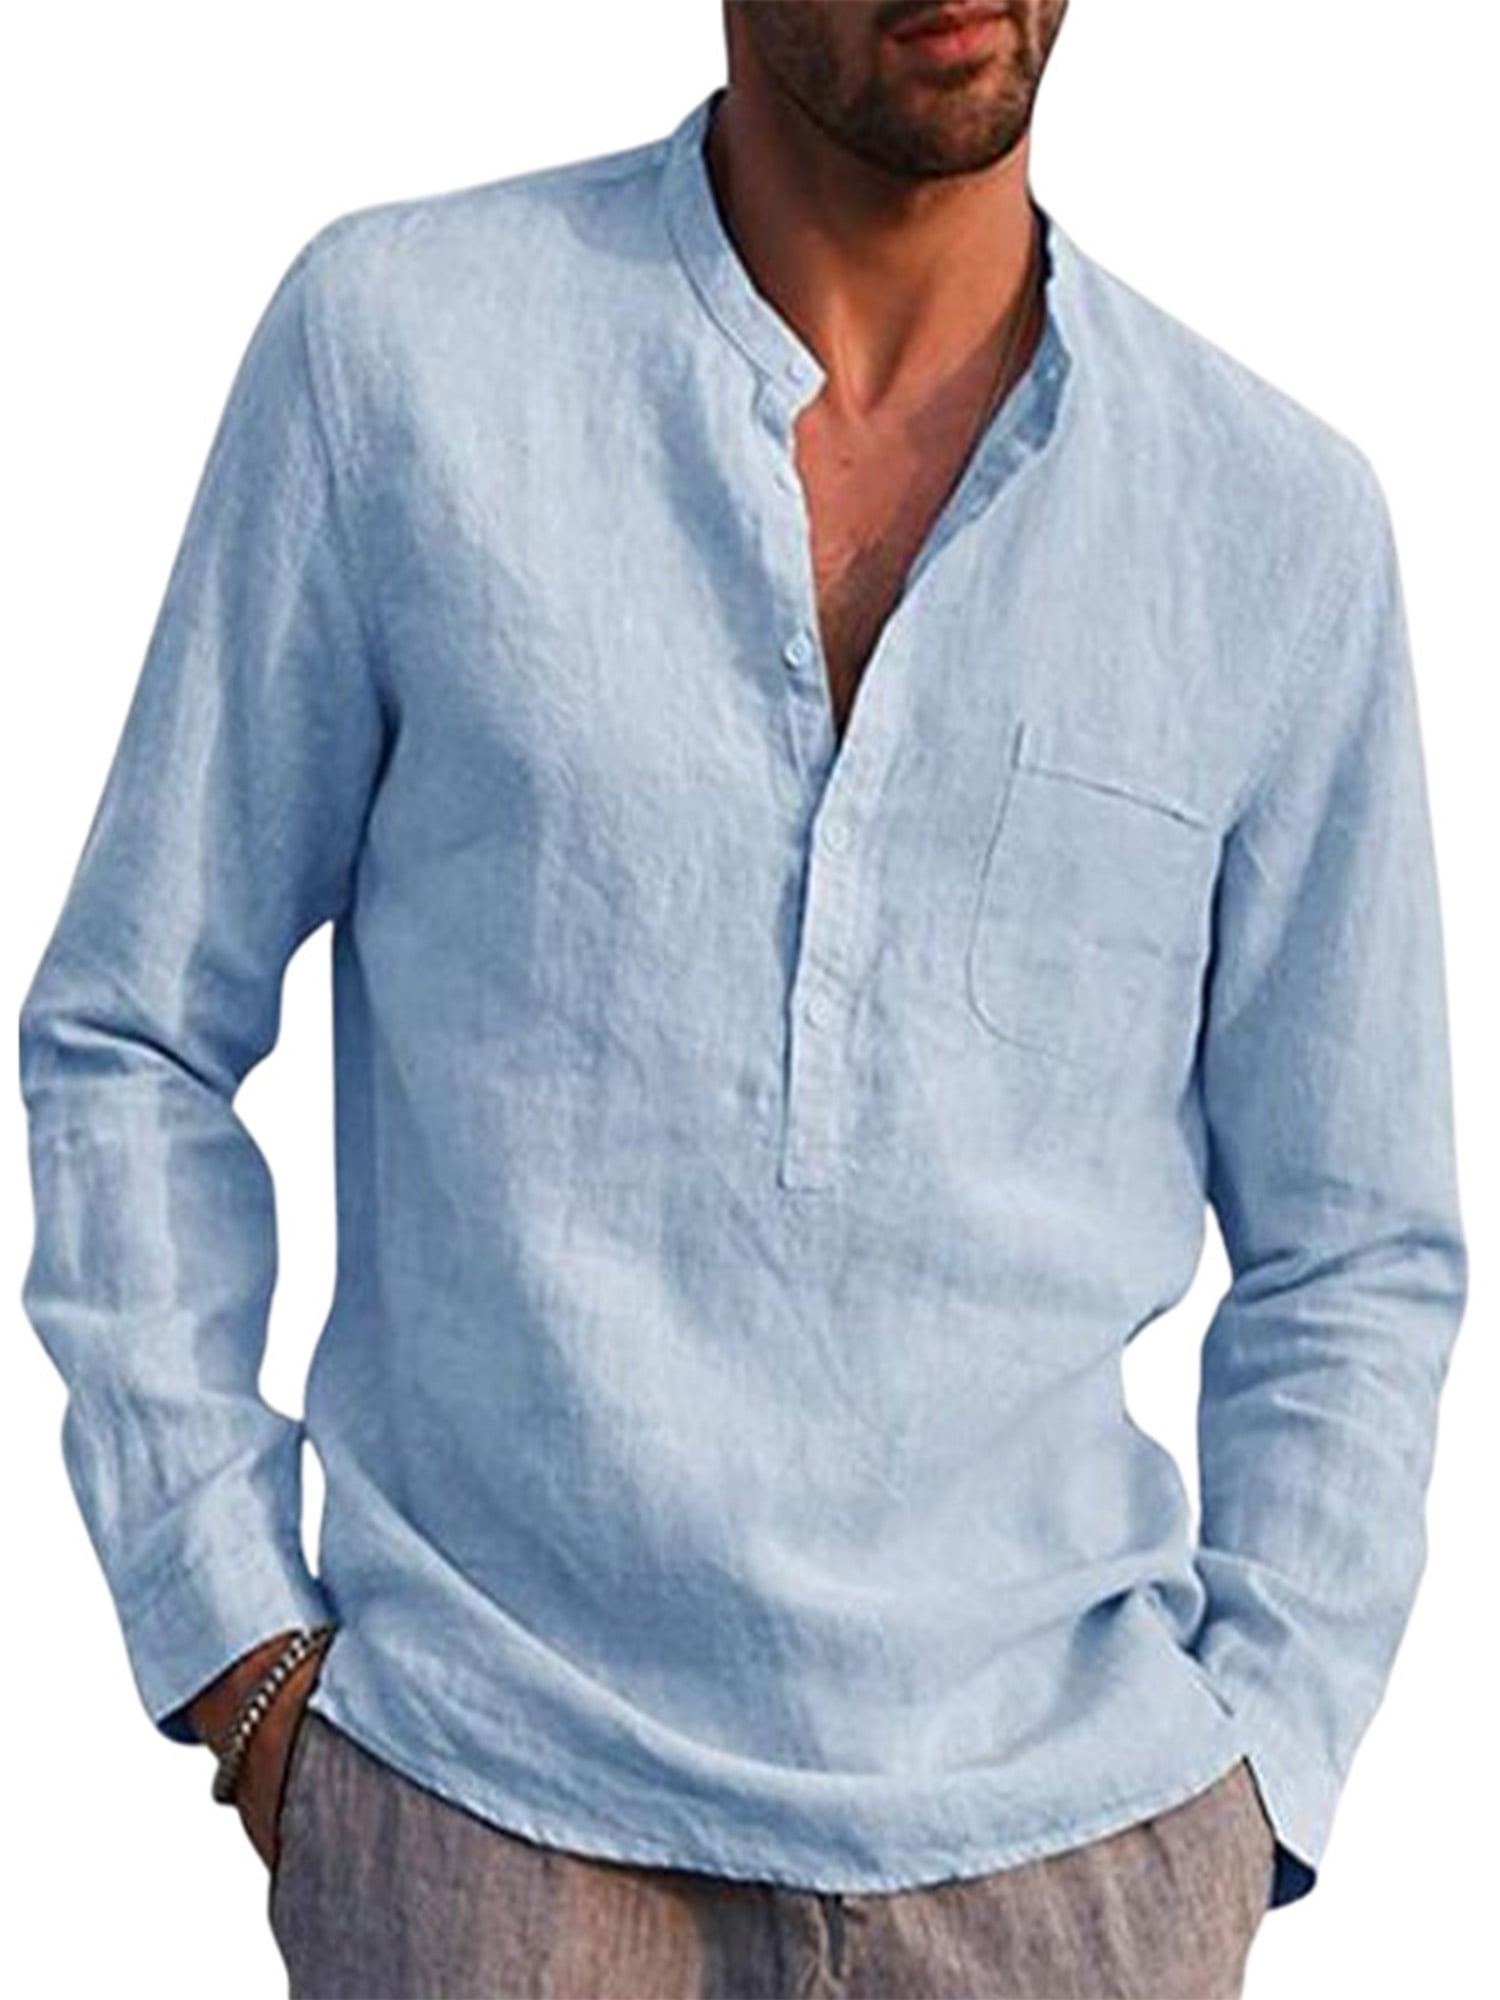 Mens Linen Henley Shirts Casual Long Sleeve T Shirt Pullover Tees V Neck Curved Hem Regular Fit Cotton Shirts Beach Yoga Tops Blouse with Pocket 